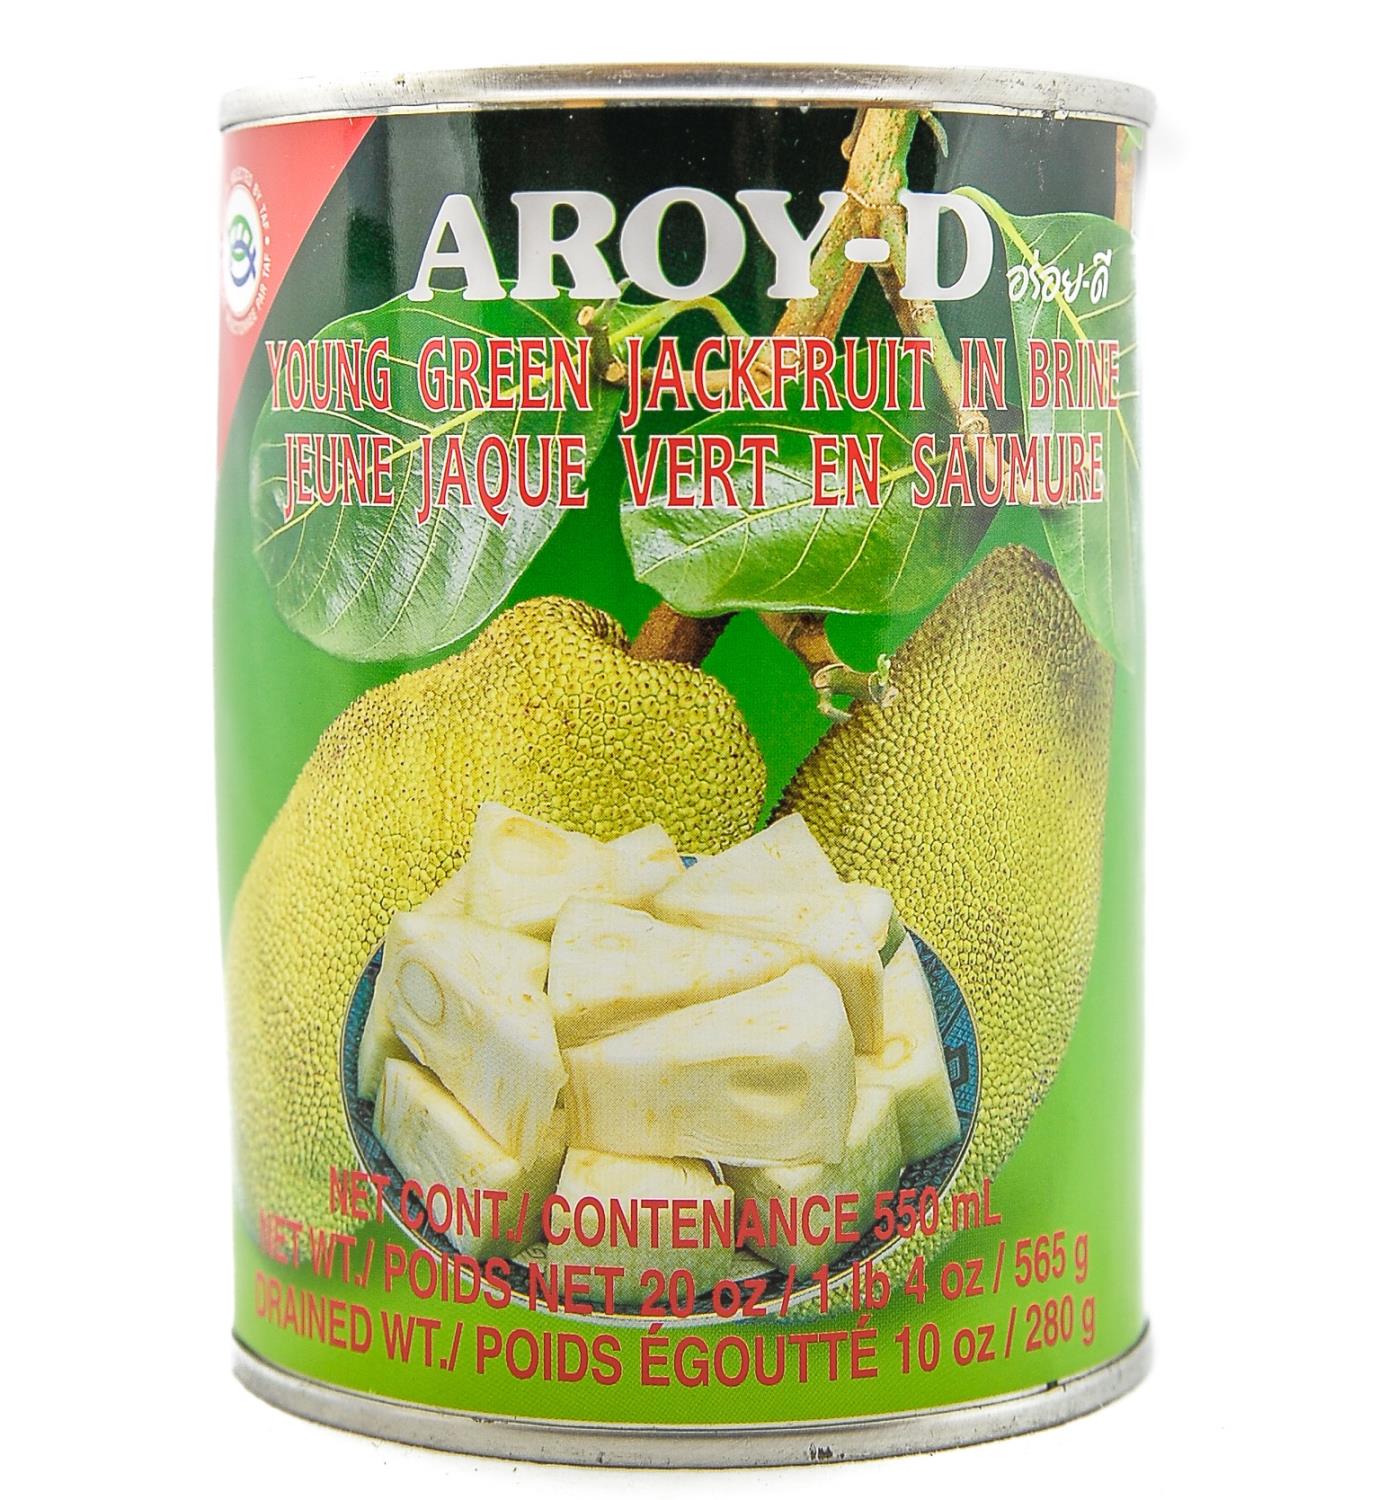 AROY-D Young green jackfruit in brine 565g TH